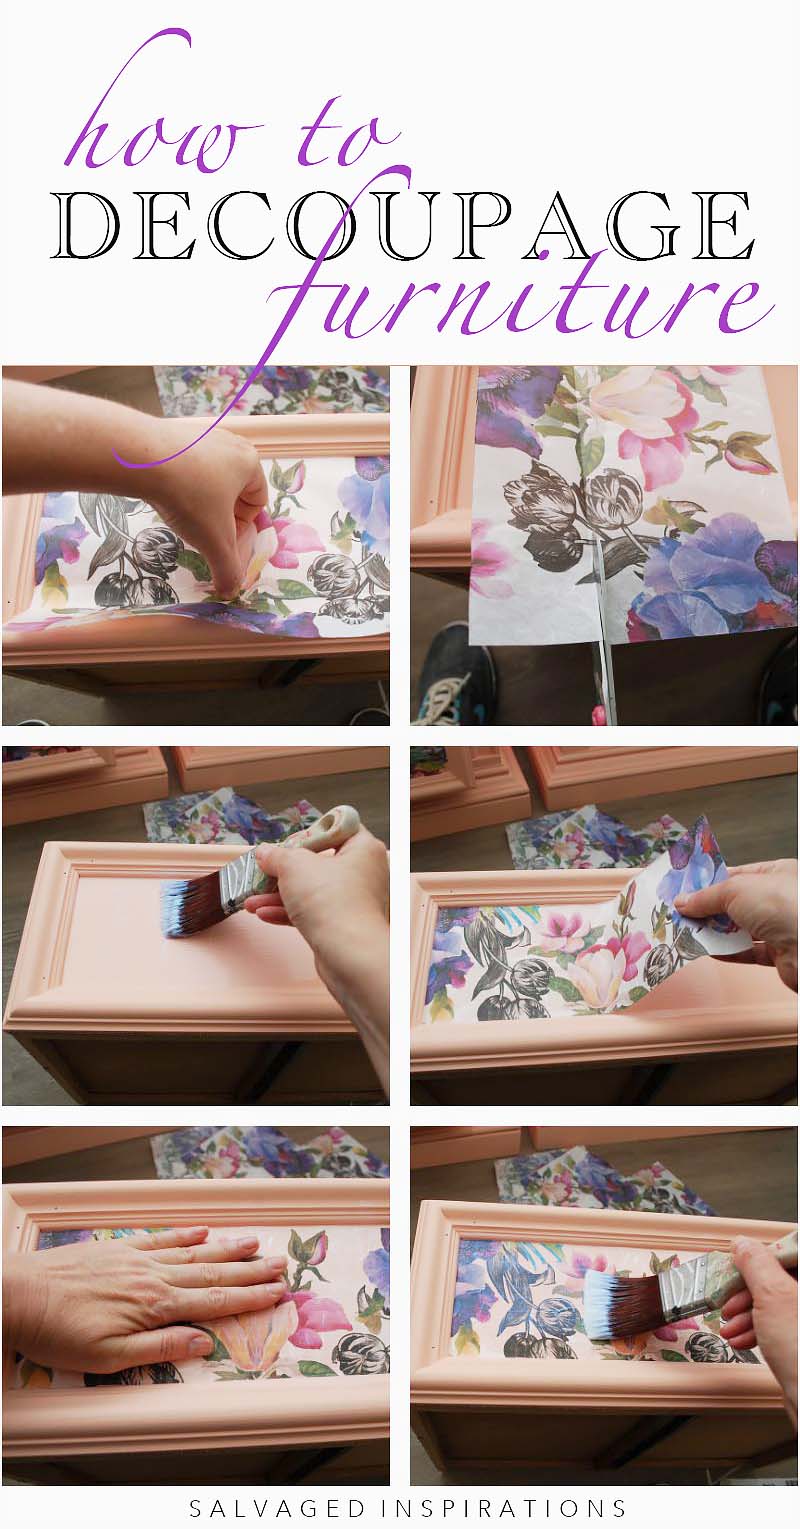 How To Decoupage Furniture Step by Step